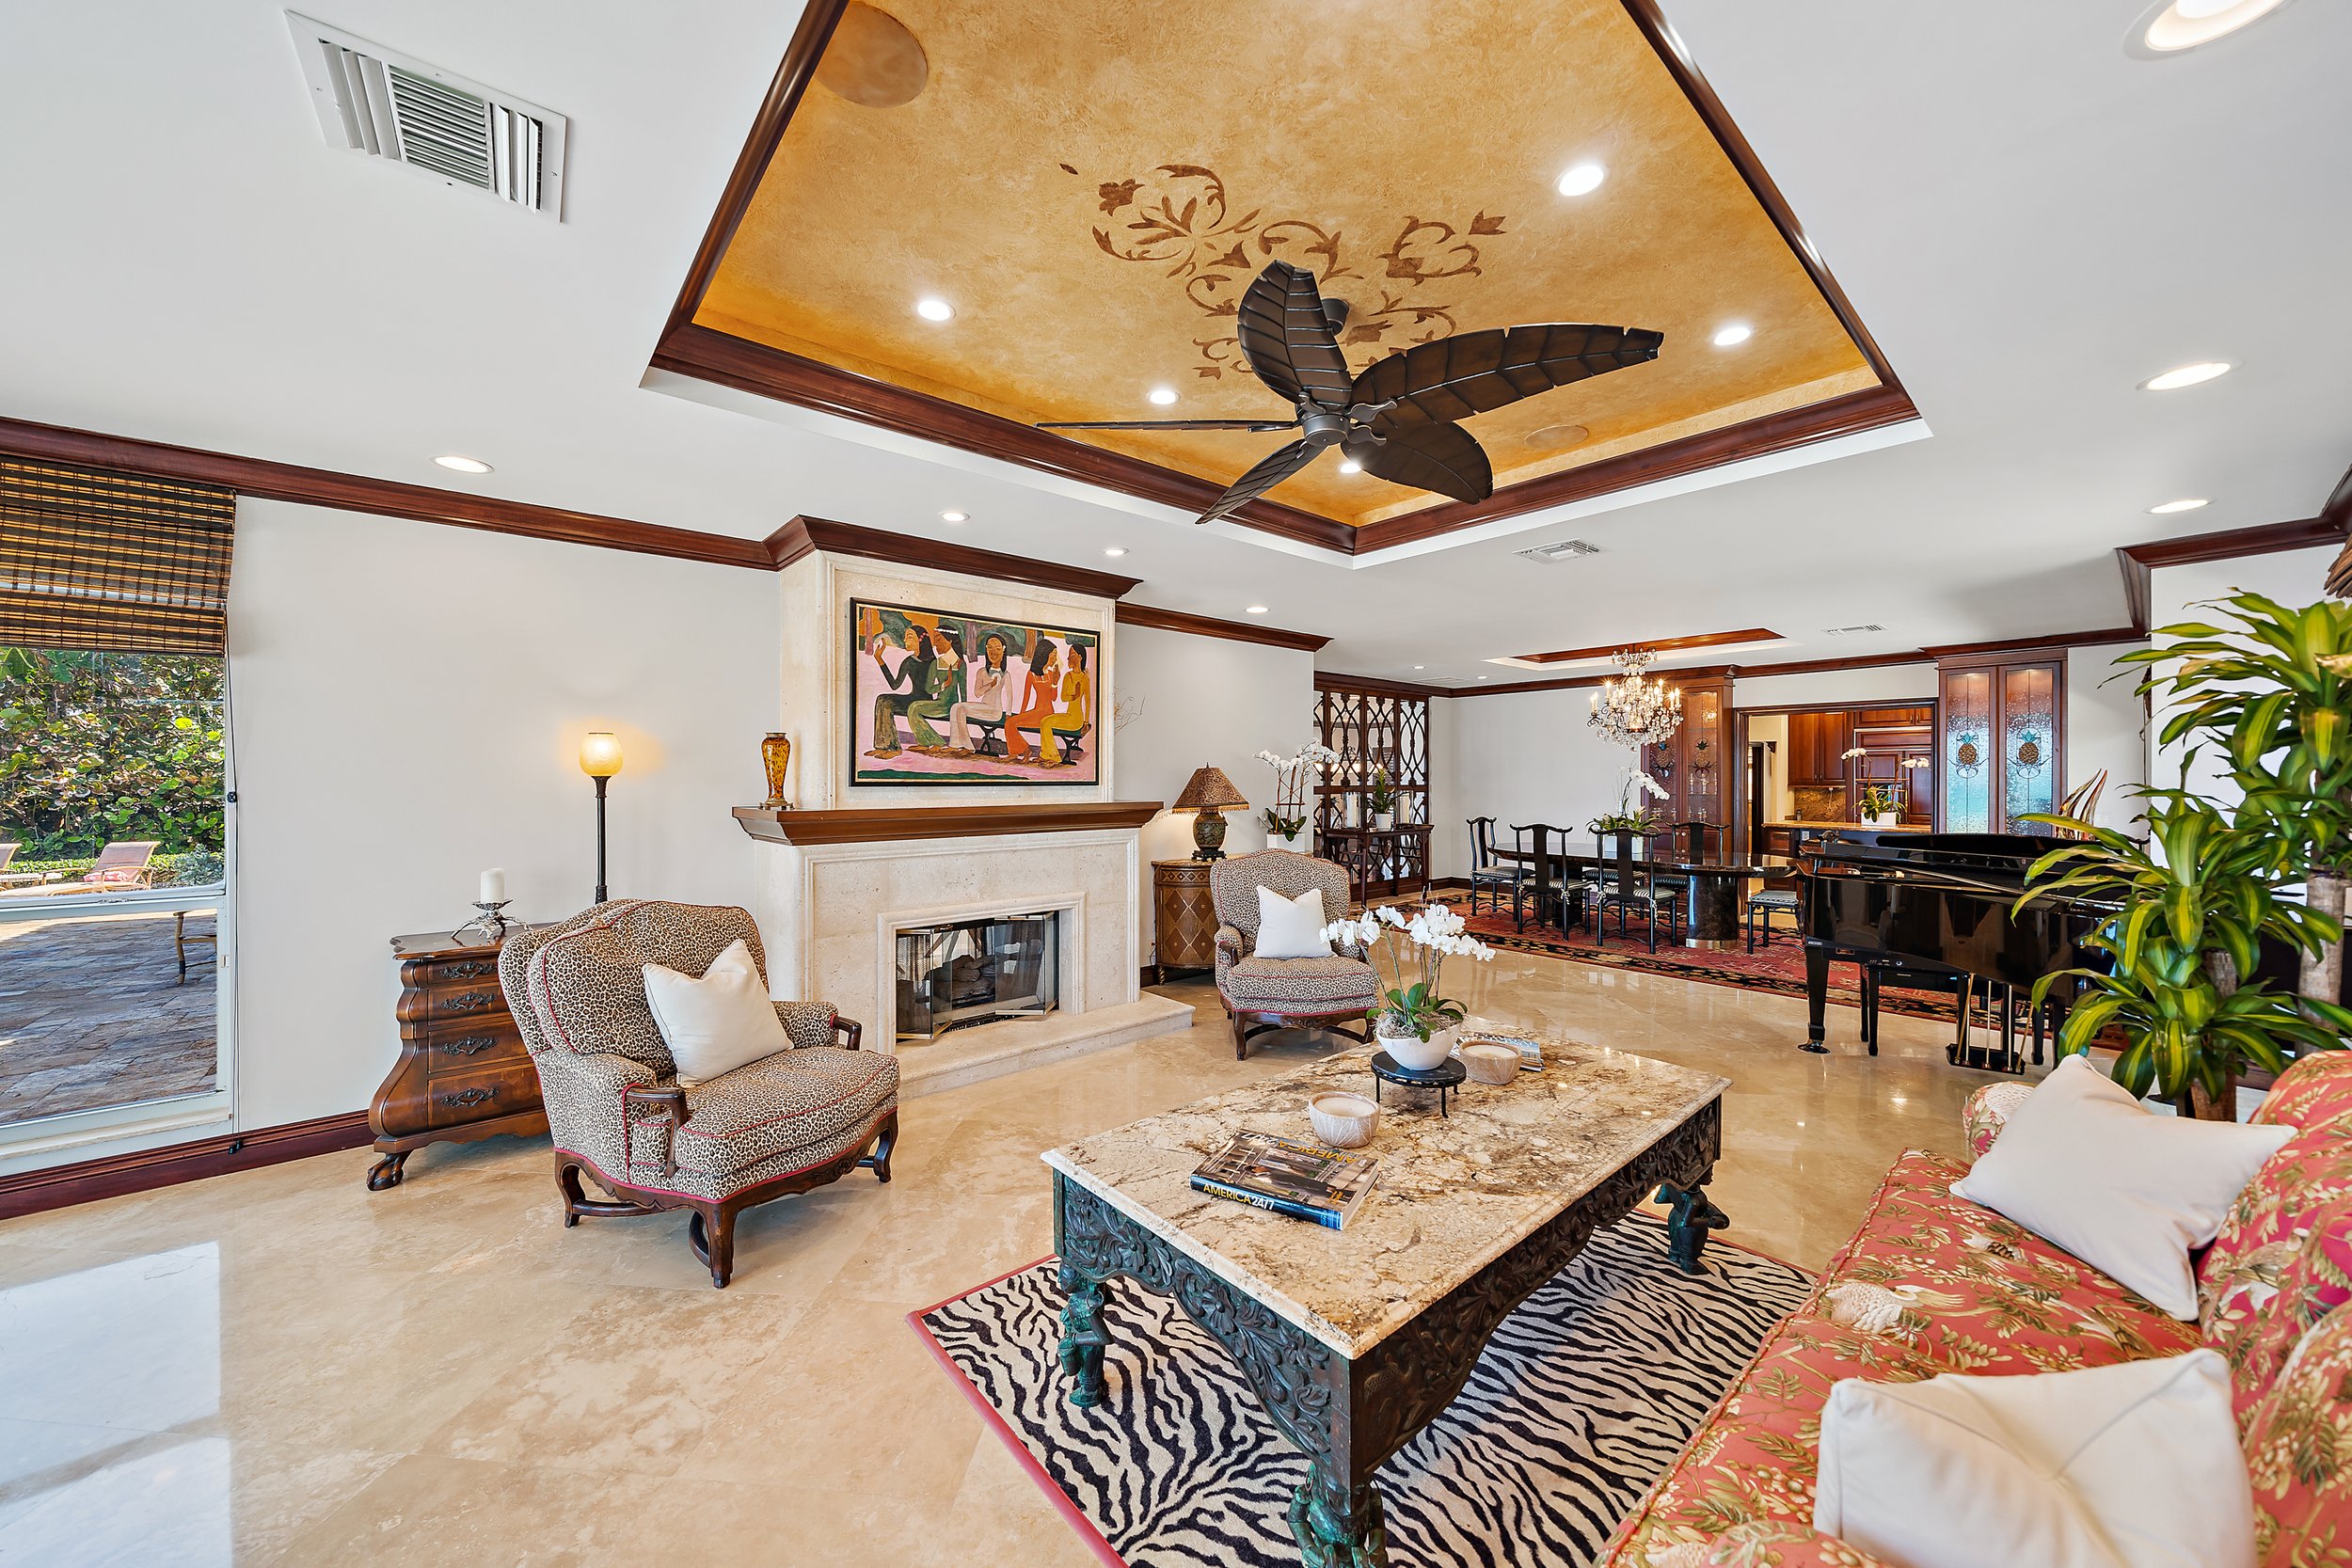 Tour A Jupiter Beachfront Mansion Owned By Clyde R. %22Buzz%22 Gibb Which Is Asking $24.9 Million 122.jpg